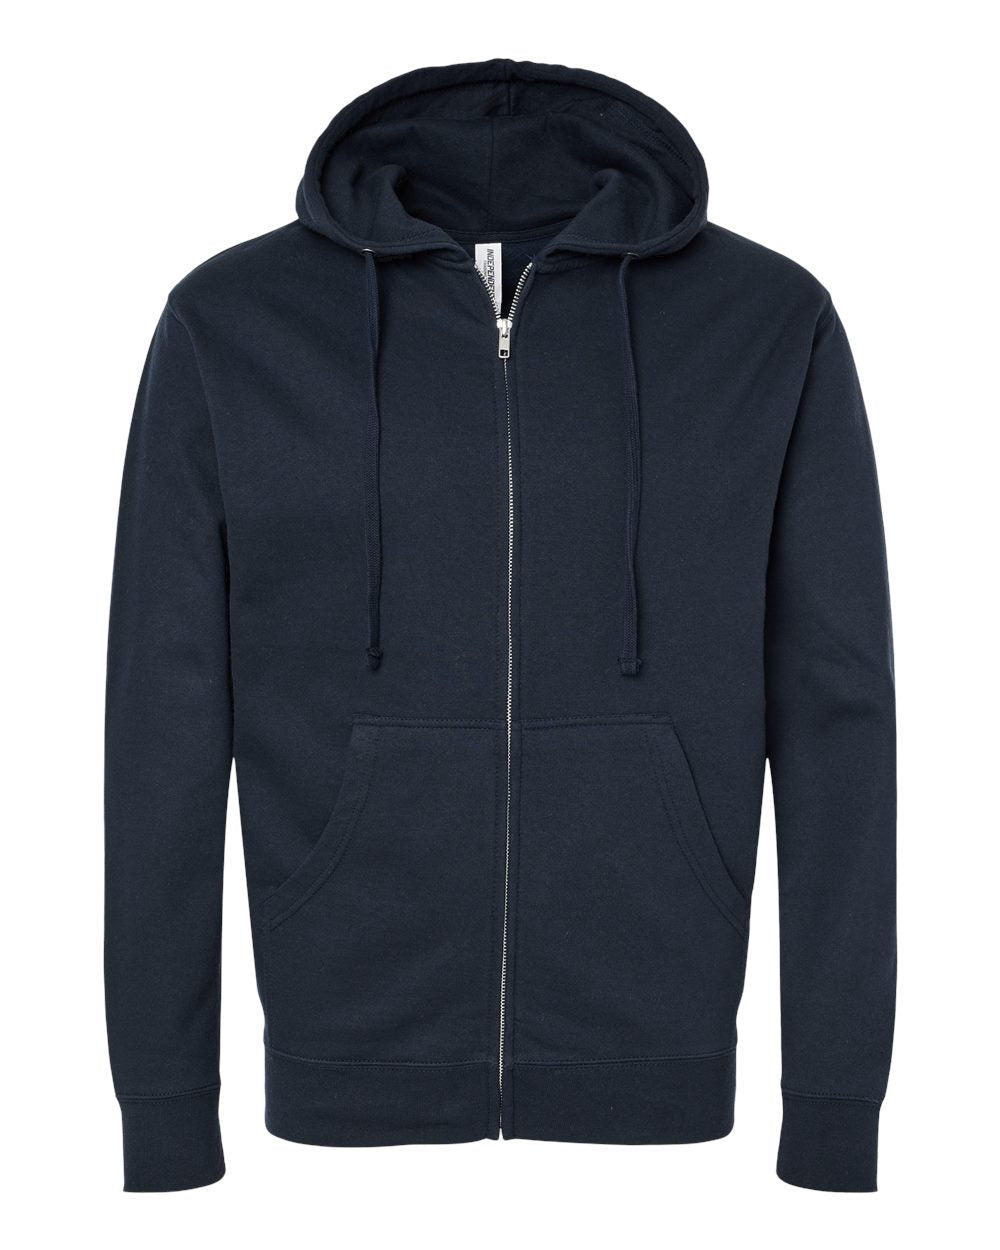 Independent Trading Co. - Midweight Full-Zip Hooded Sweatshirt - SS4500Z